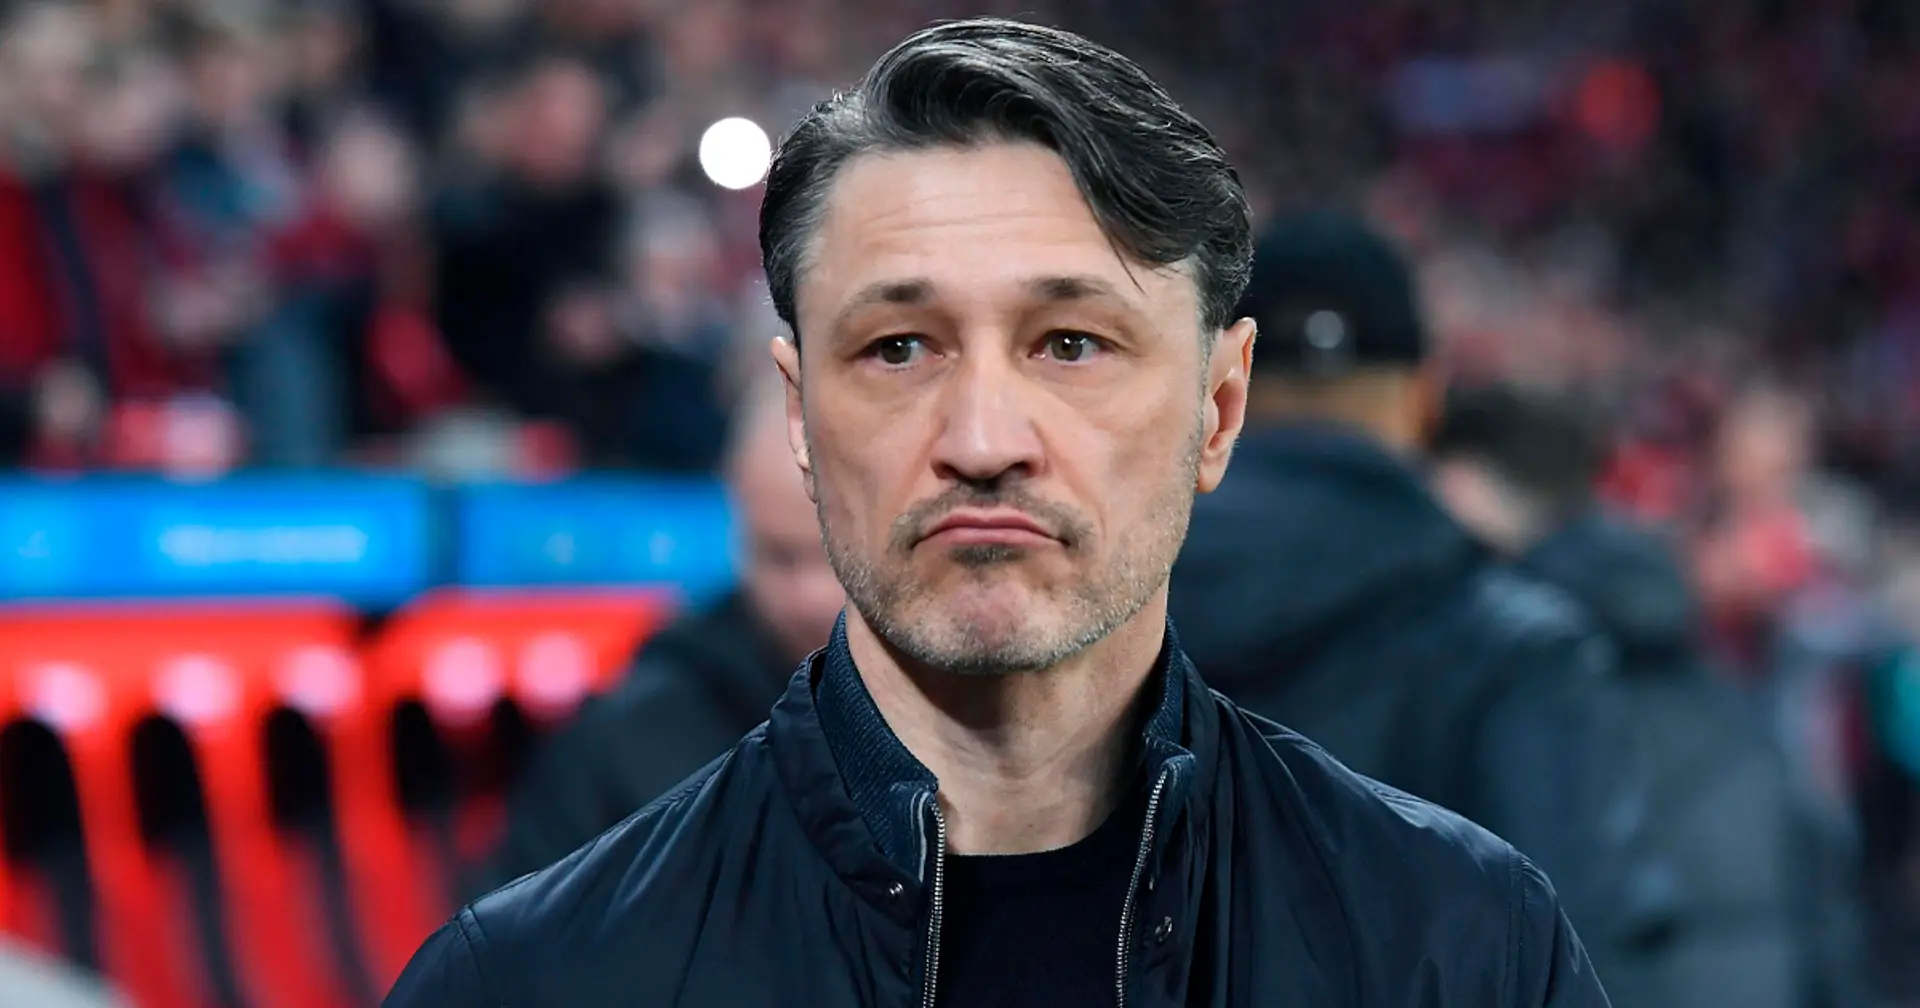 Niko Kovac (yes) reacts to rumours he could take charge at Liverpool